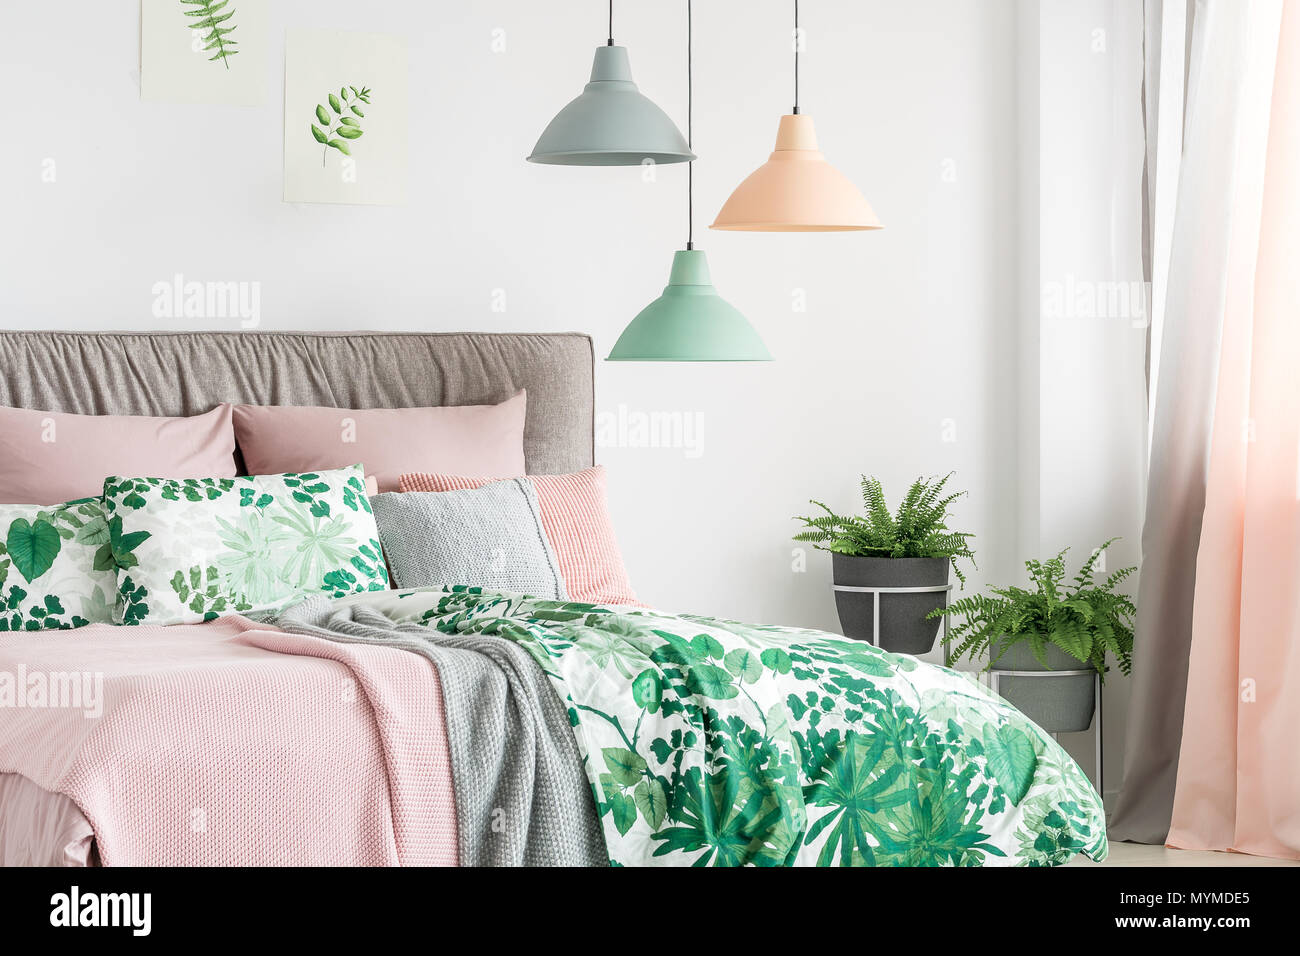 Three lamps in pastel colors hanging above bed with soft bedhead in bright interior Stock Photo